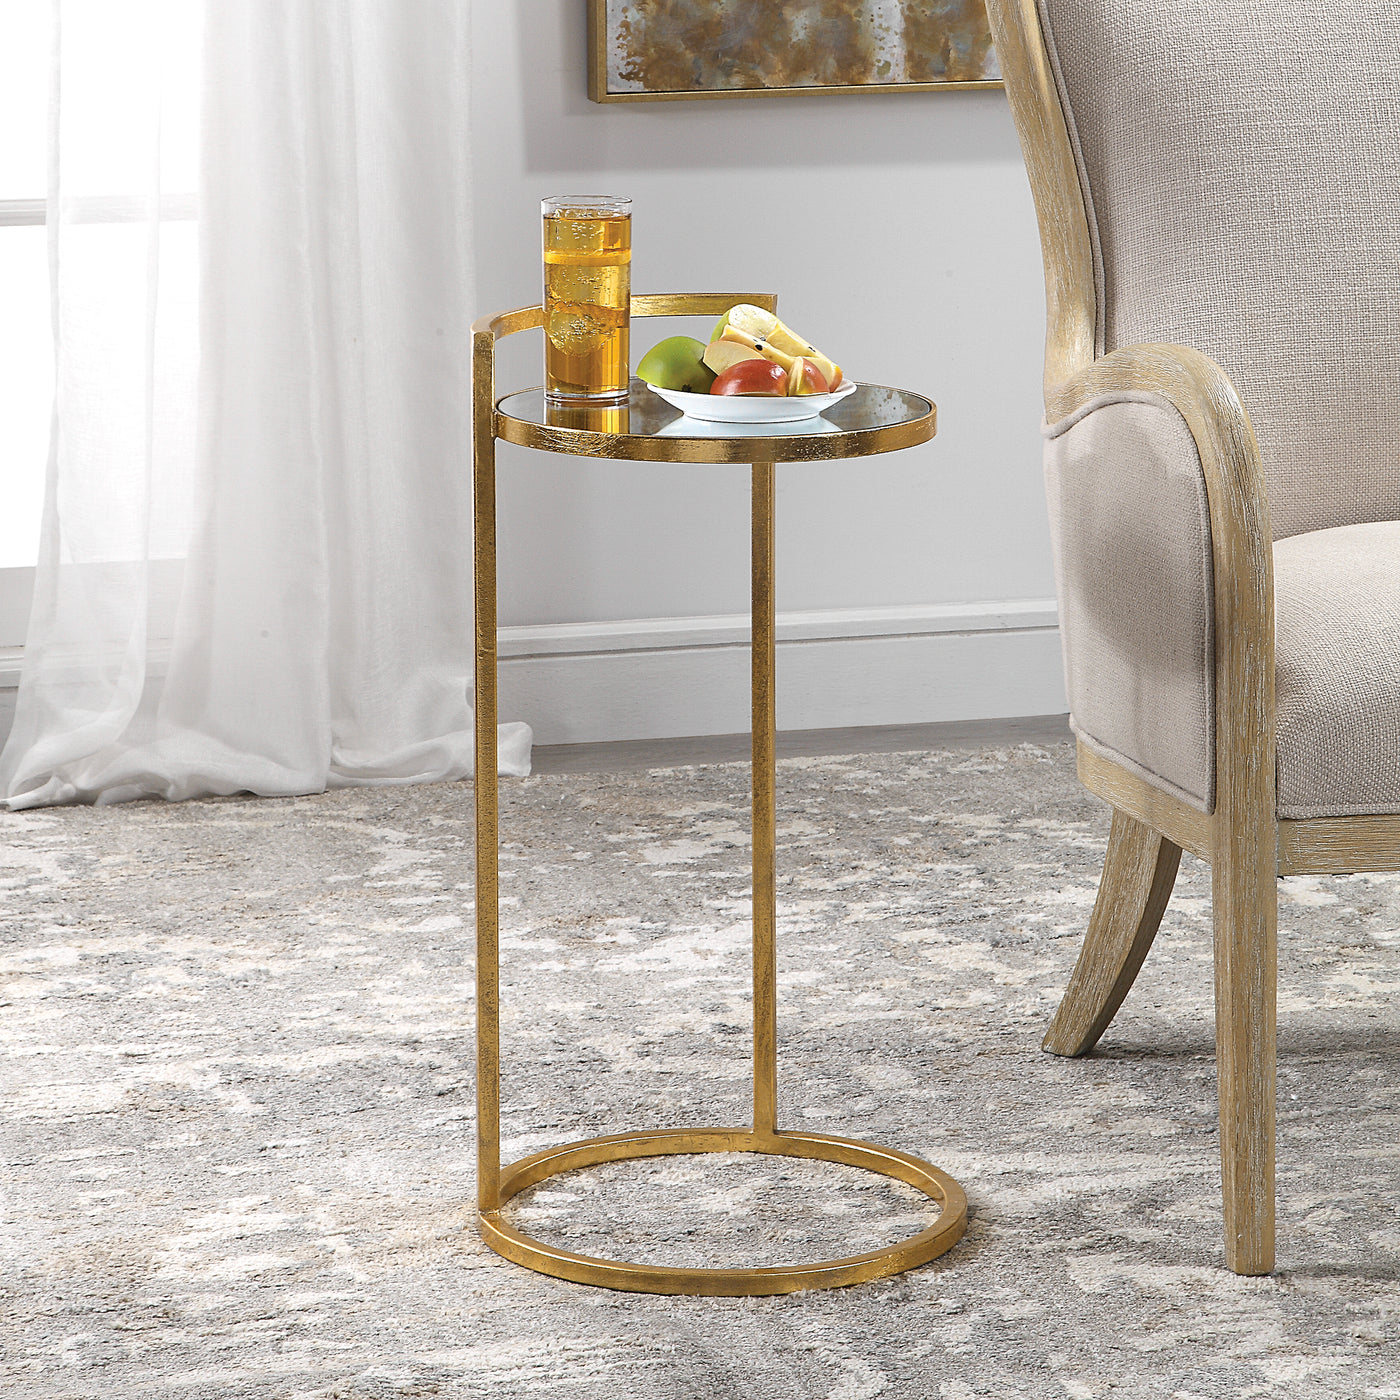 Solidly Constructed Of Hand Forged Iron, This Accent Table Is Finished In A Bright Gold Leaf, Complete With A Mirrored Top.